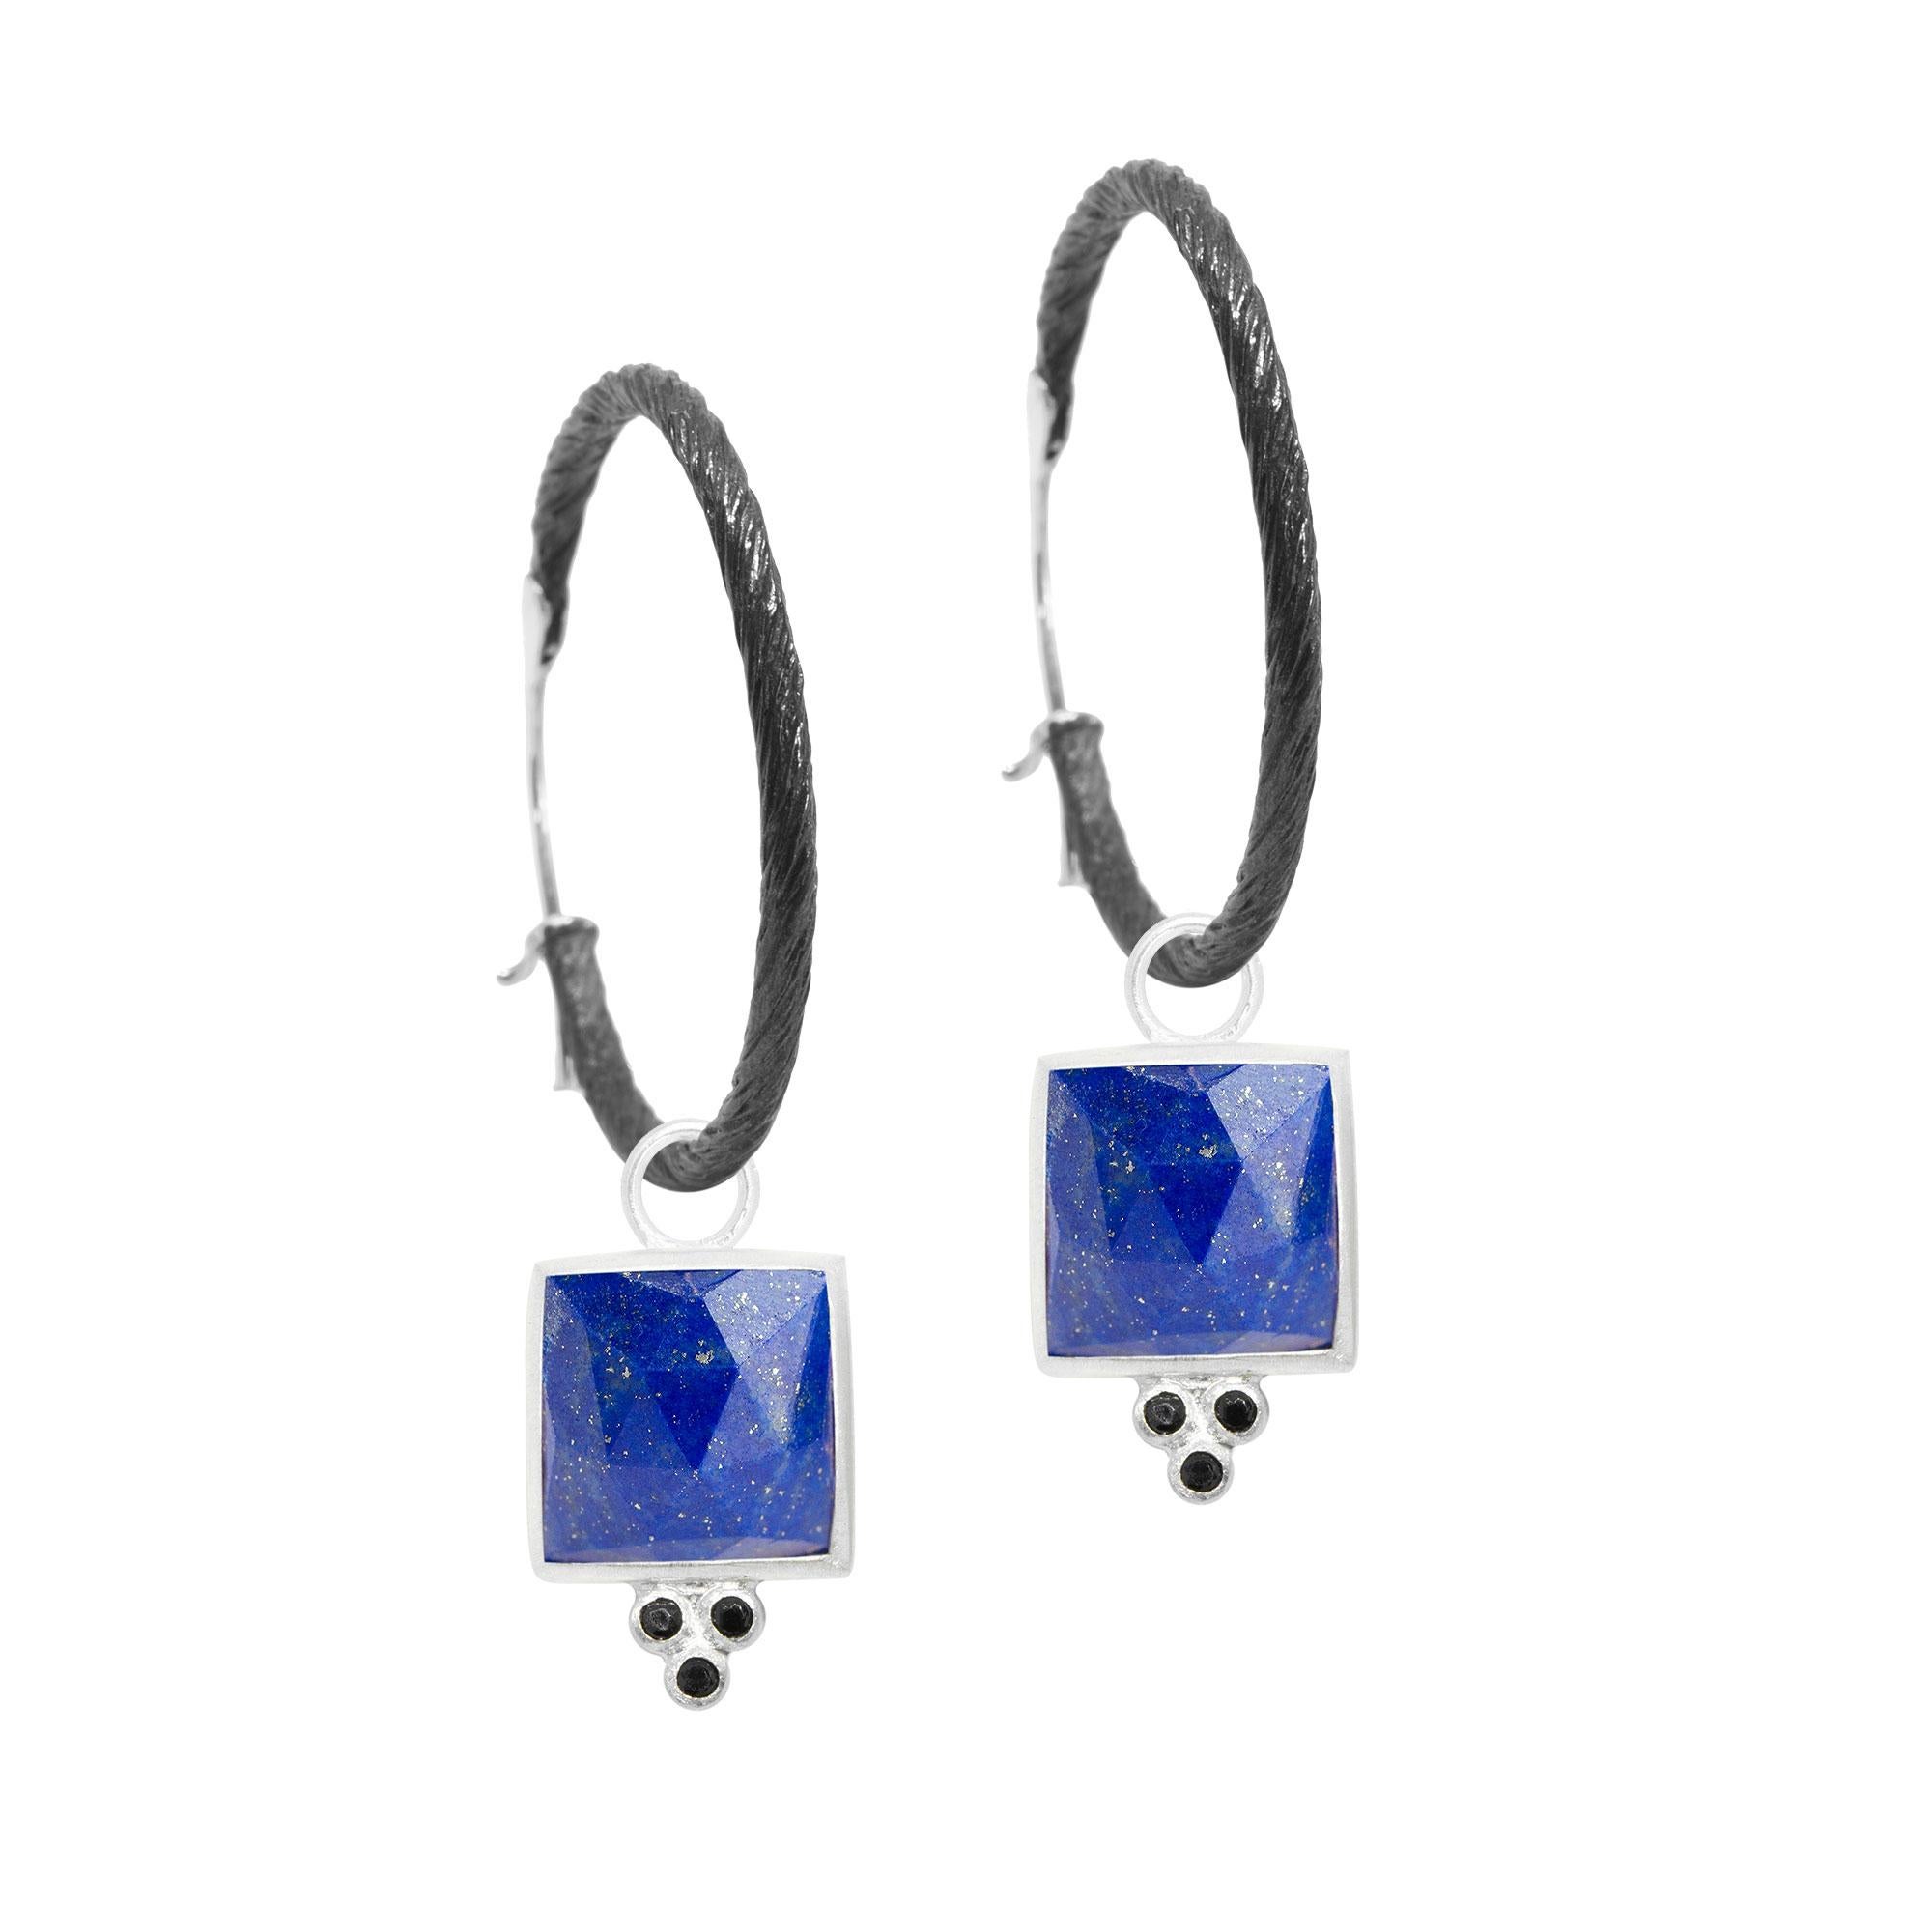 Square dance: Designed with hand-faceted lapis framed in textured matte silver, our Ariana Silver Charms pair with any of our hoops and mix well with other styles.
Nina Nguyen Design's patent-pending earrings have an element on the back of the stud